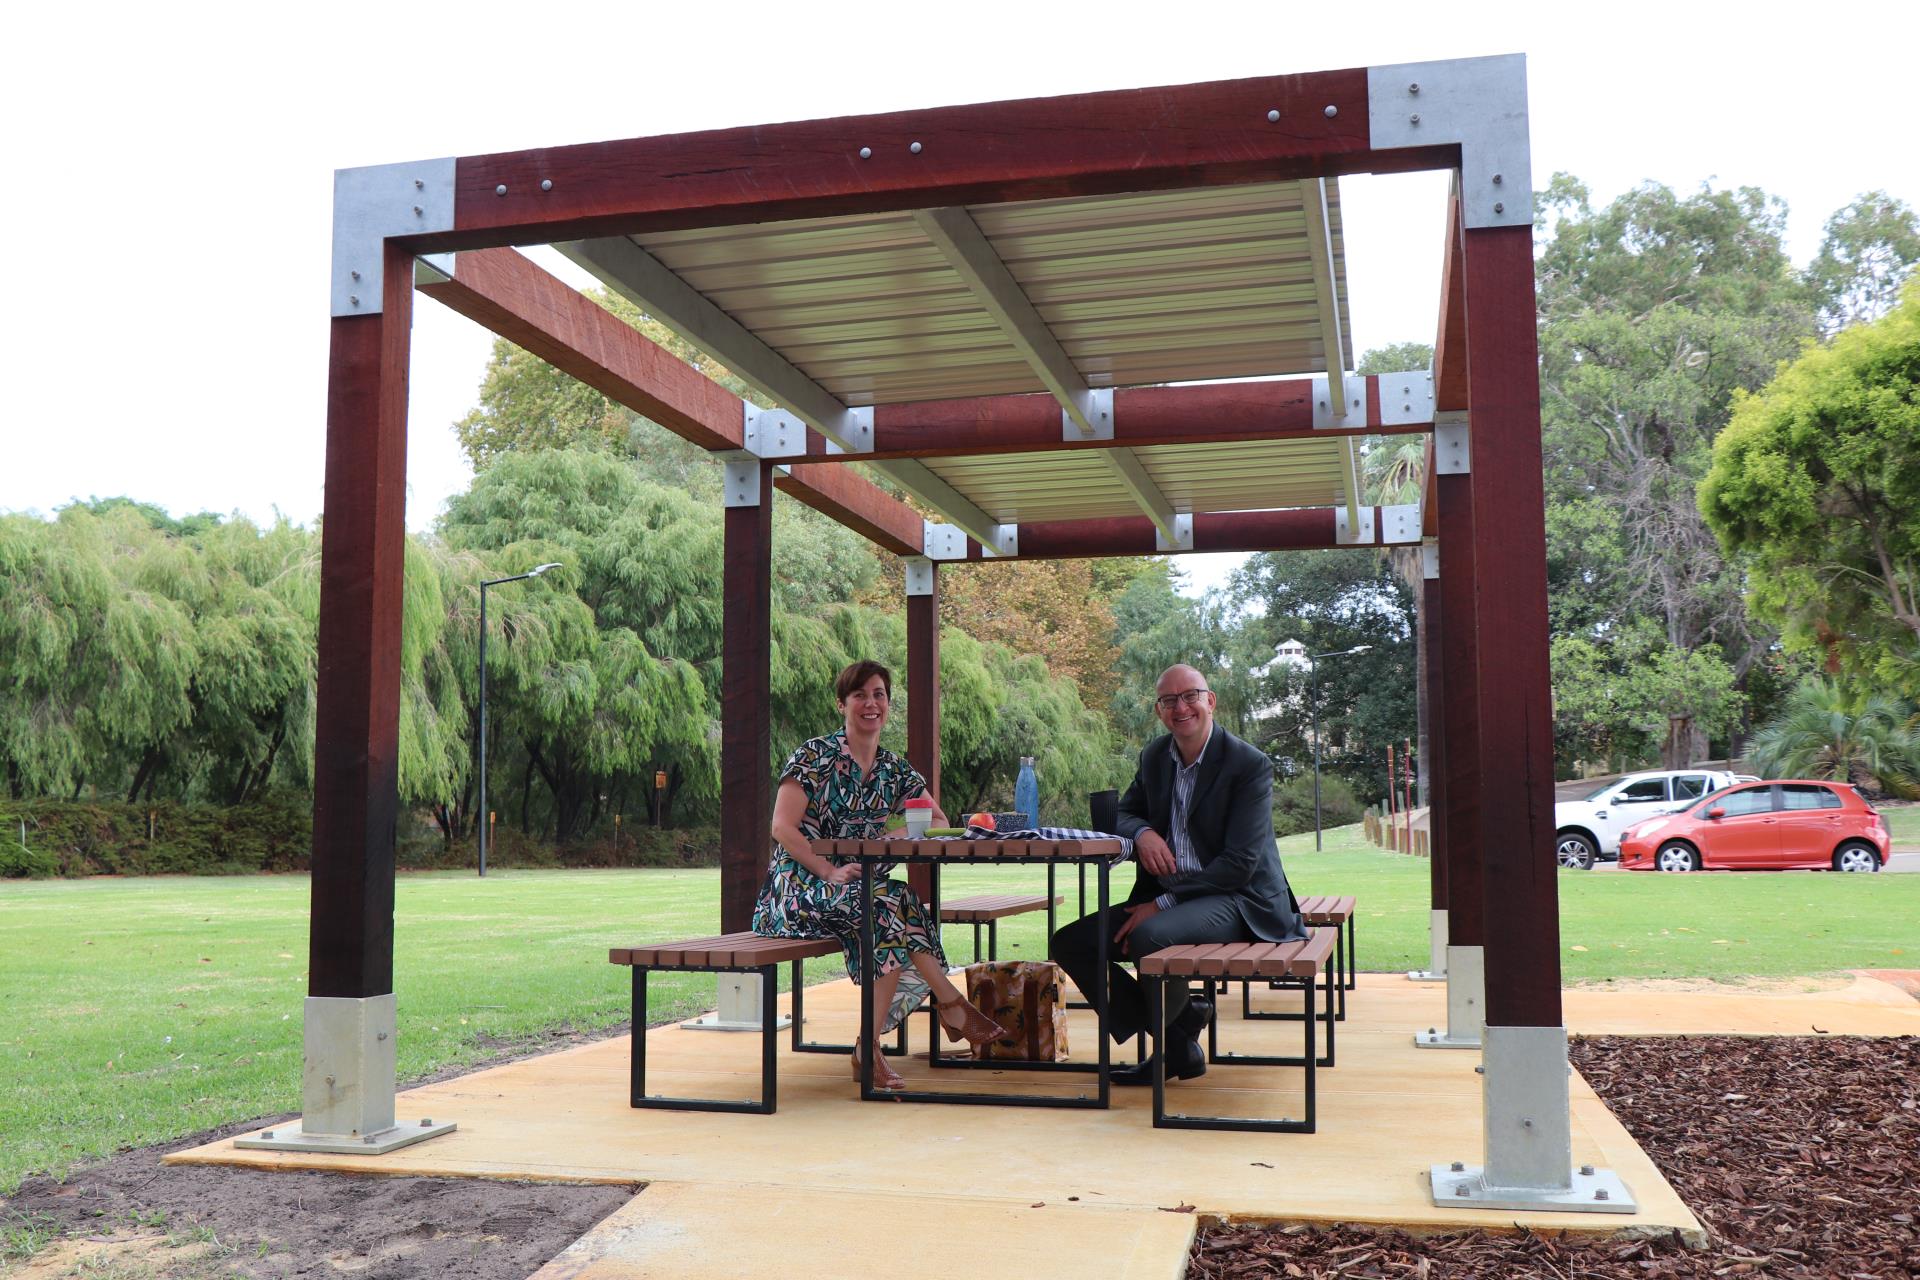 Banks Reserve Now Home to New Picnic Tables and Seats